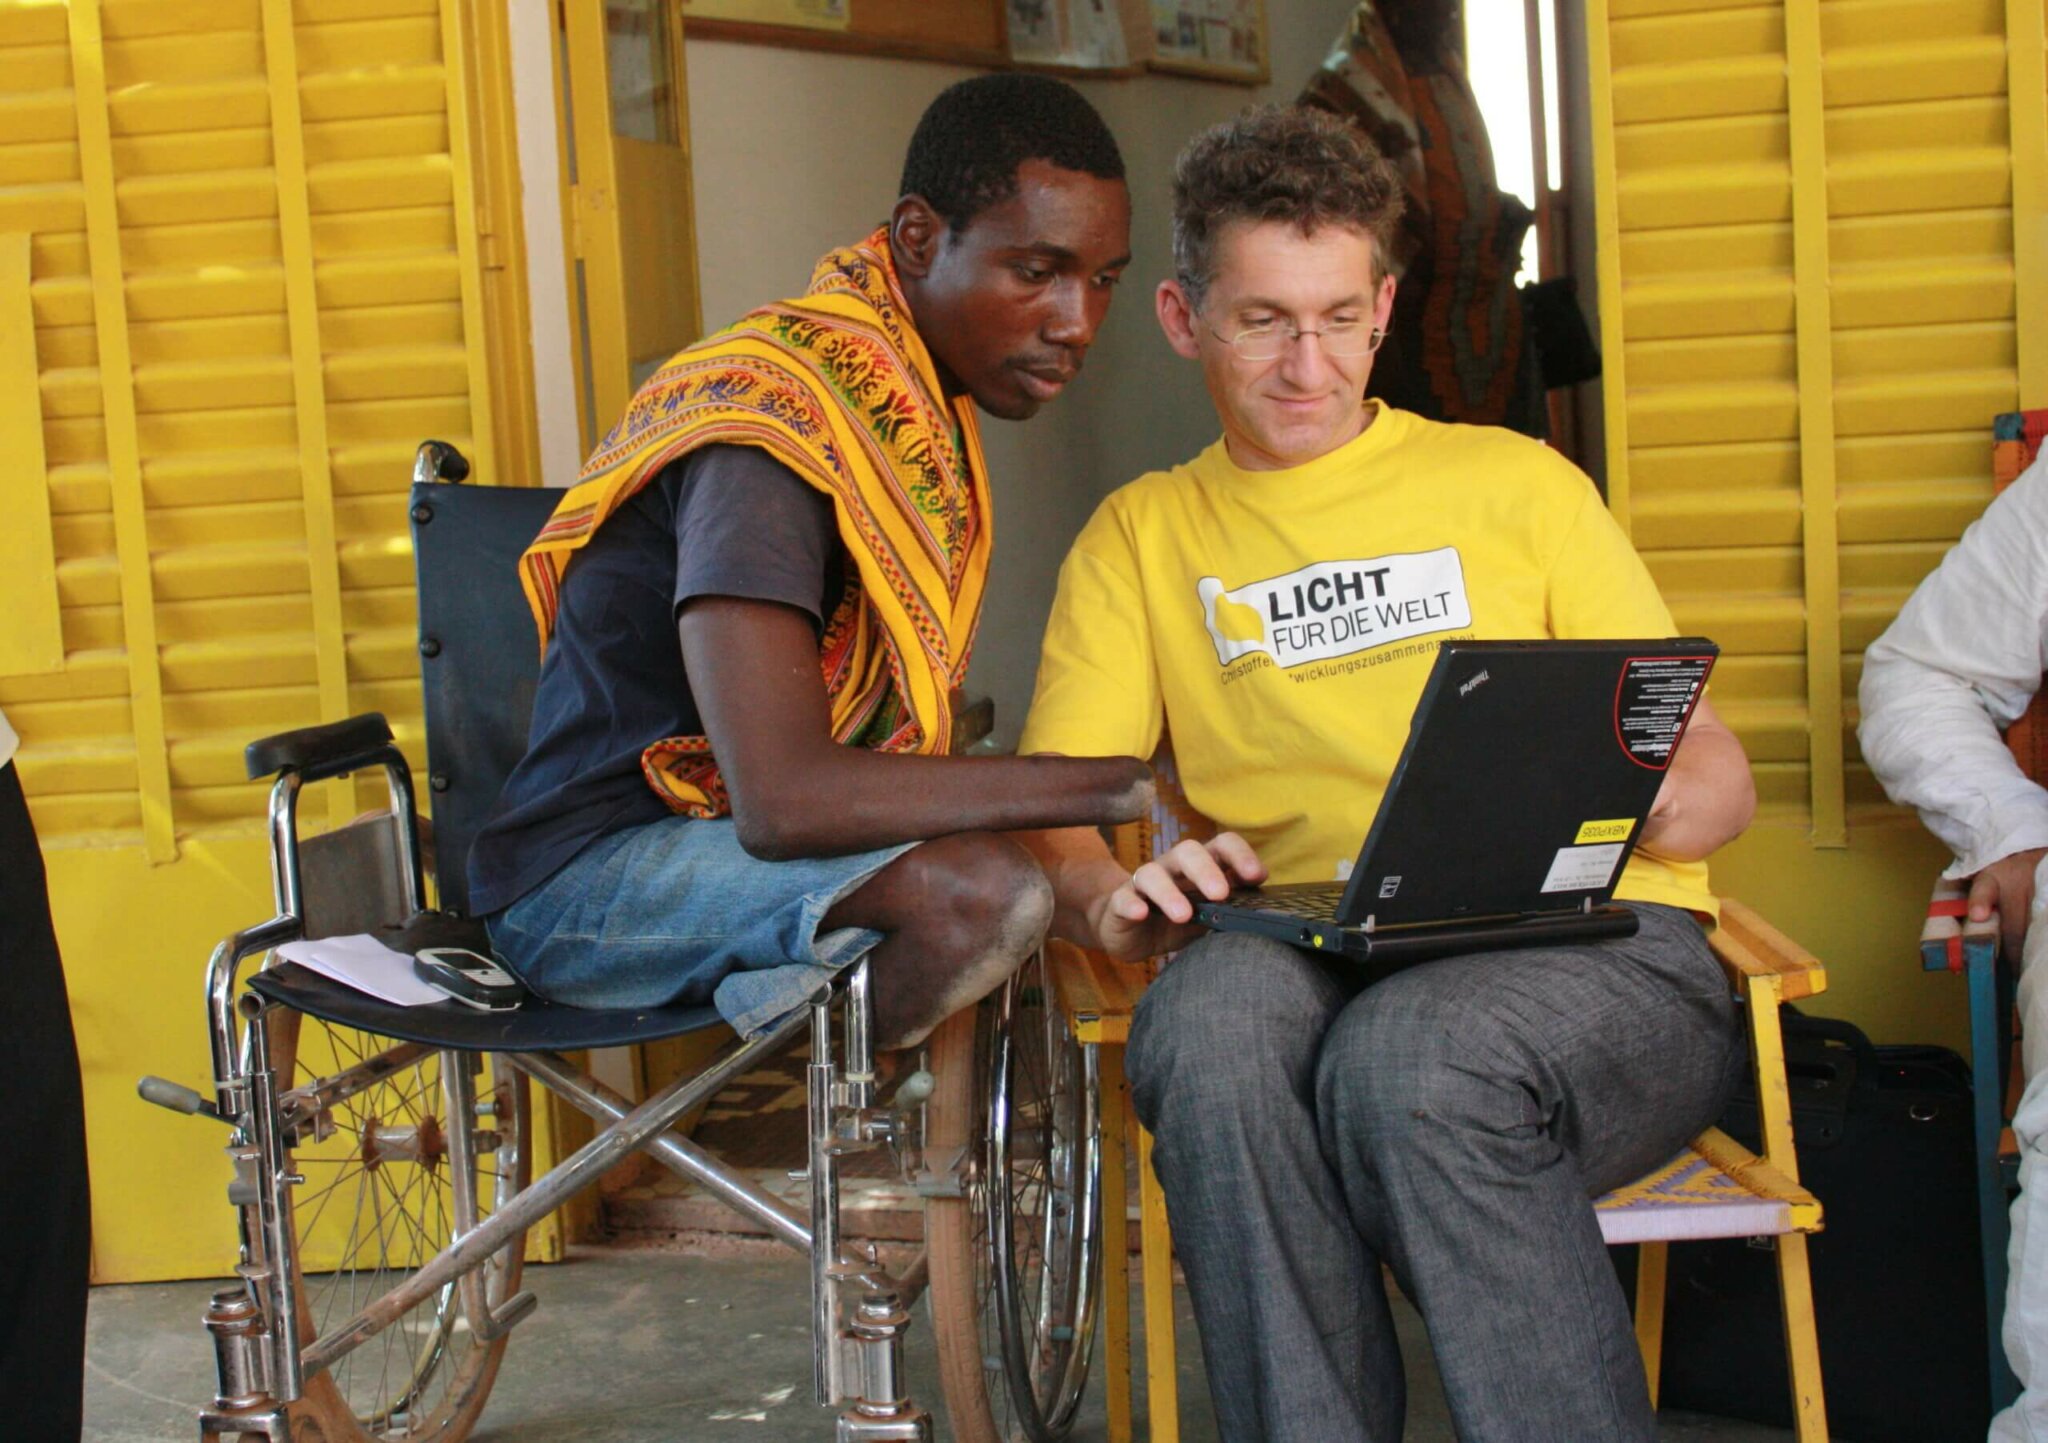 Rupert and a young man in a wheelchair look at his laptop together.